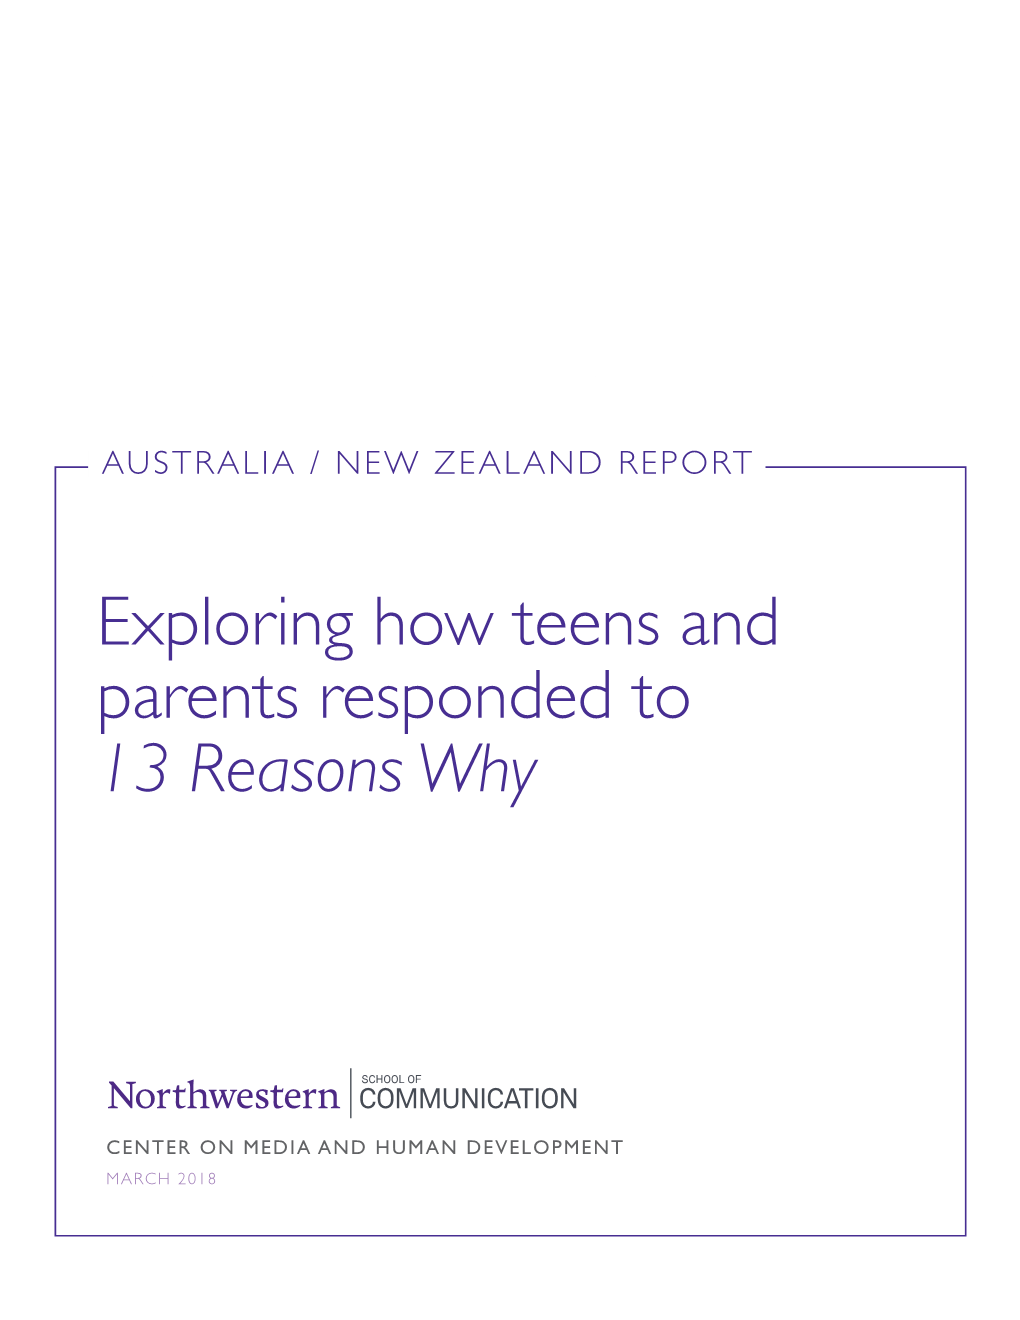 Exploring How Teens and Parents Responded to 13 Reasons Why